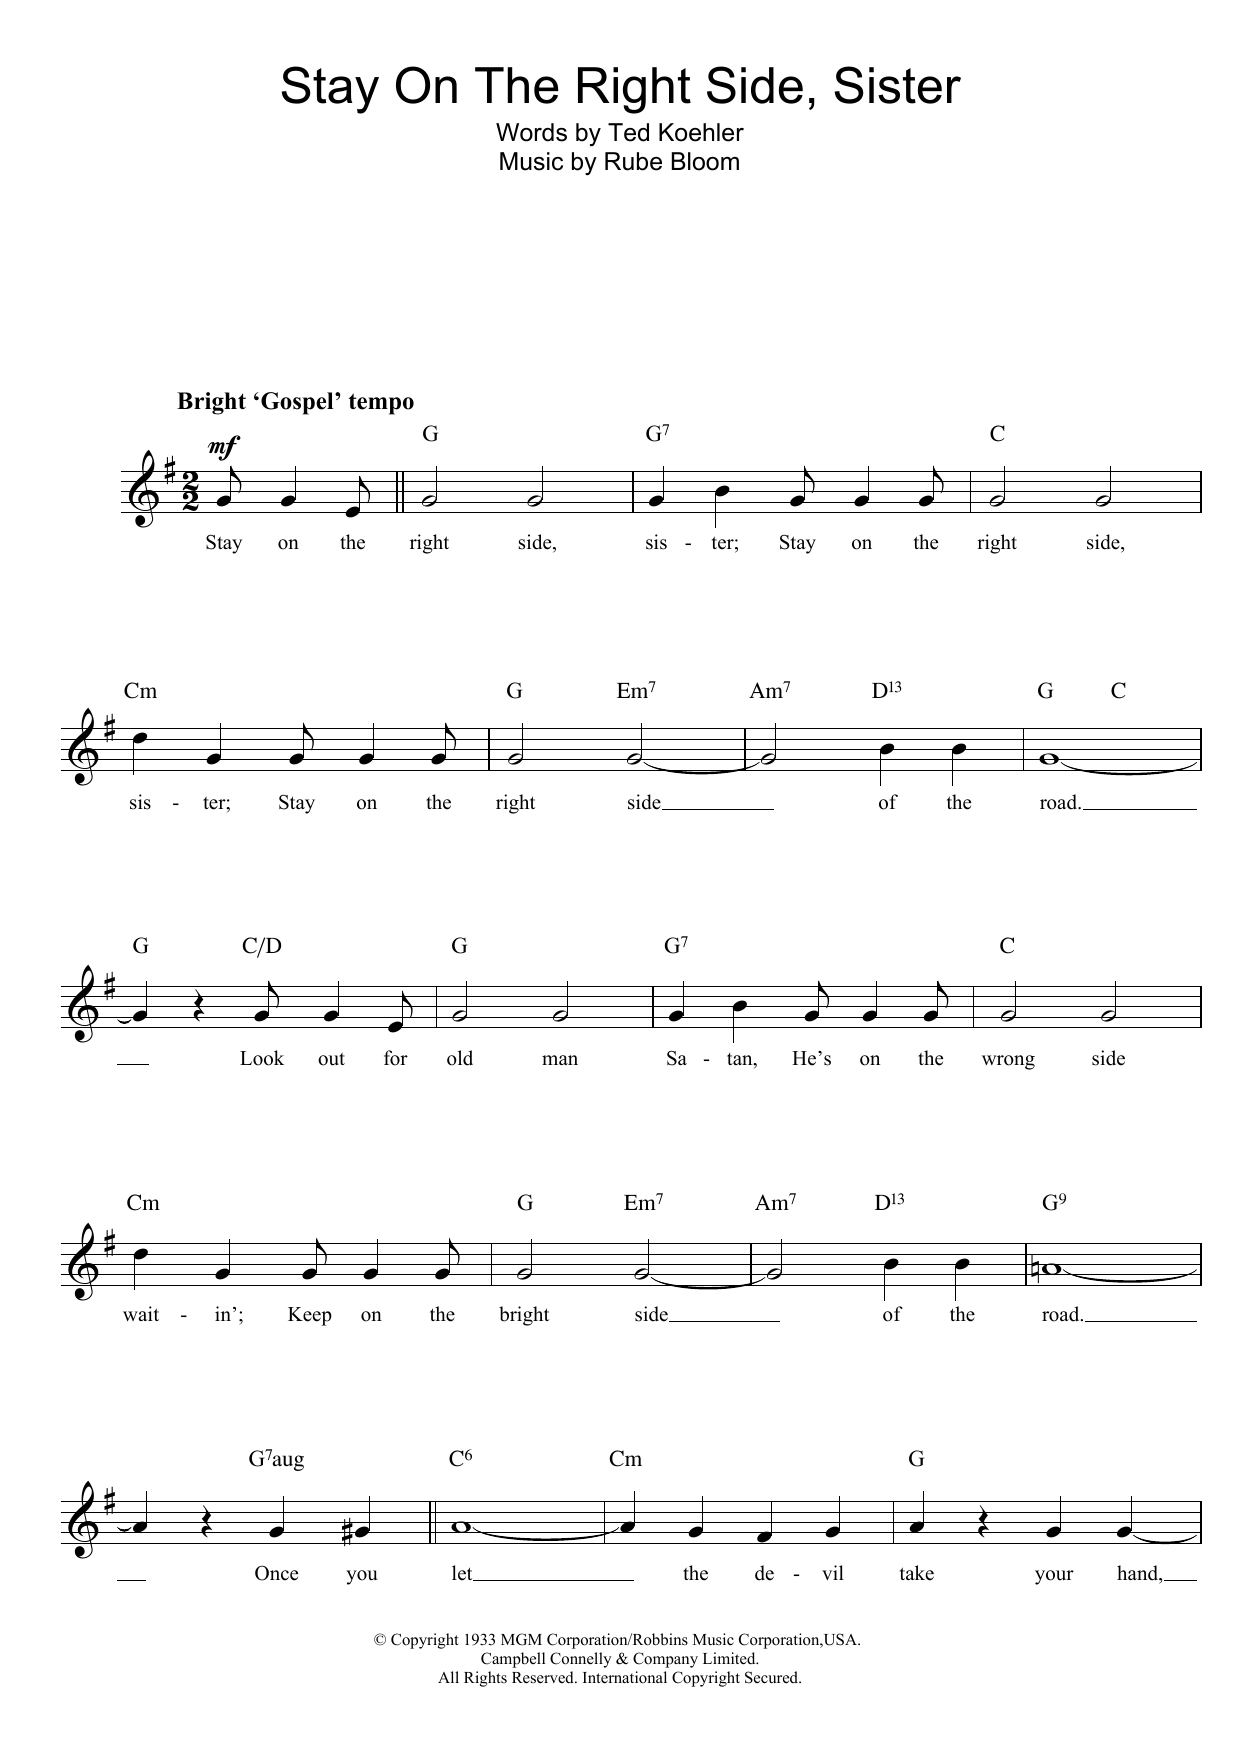 Rube Bloom Stay On The Right Side Sister sheet music notes printable PDF score